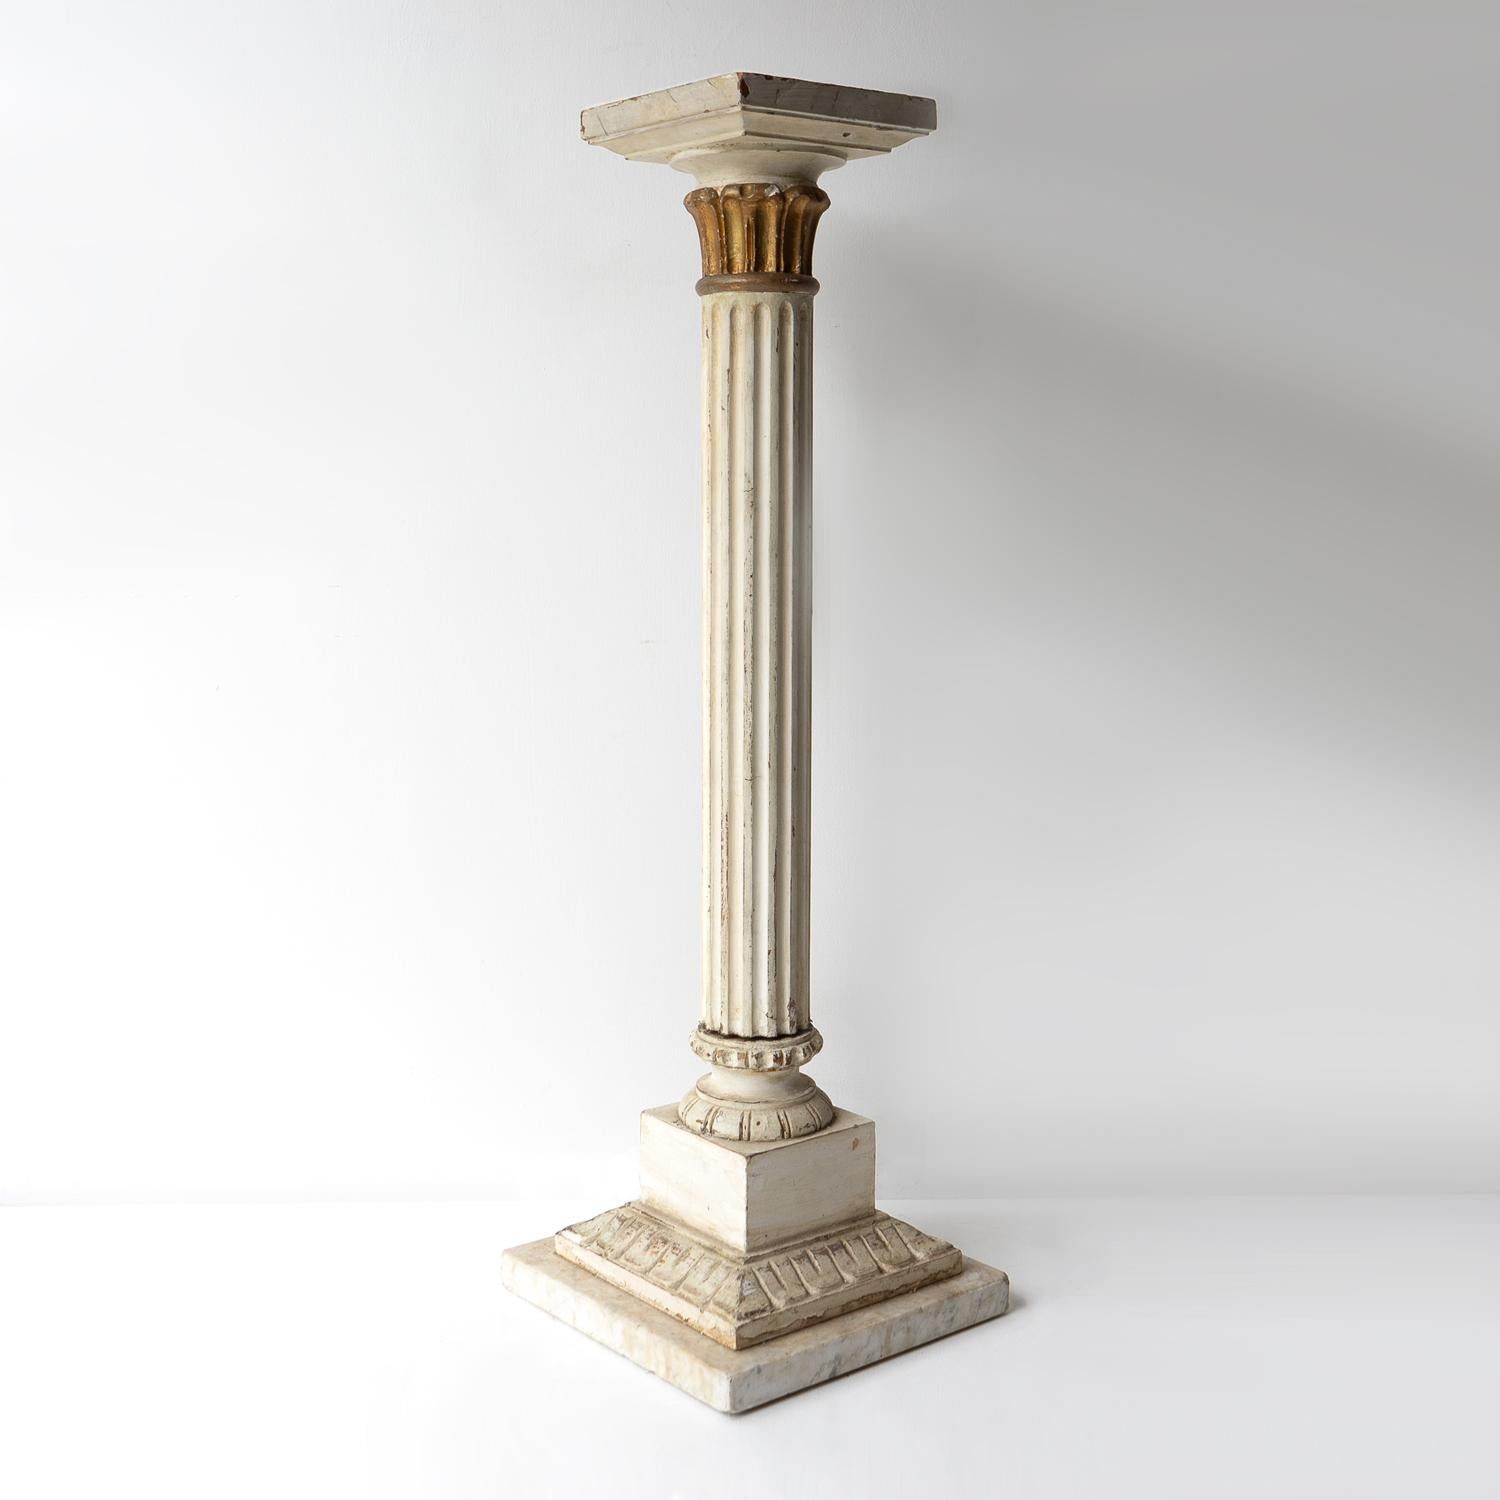 ANTIQUE PEDESTAL, 19th Century

Decorative parcel-gilt and simulated marble stand in the form of a Corinthian column with a fluted shaft.
Made from painted wood and plaster with a genuine marble base providing weight.
It is in very good vintage